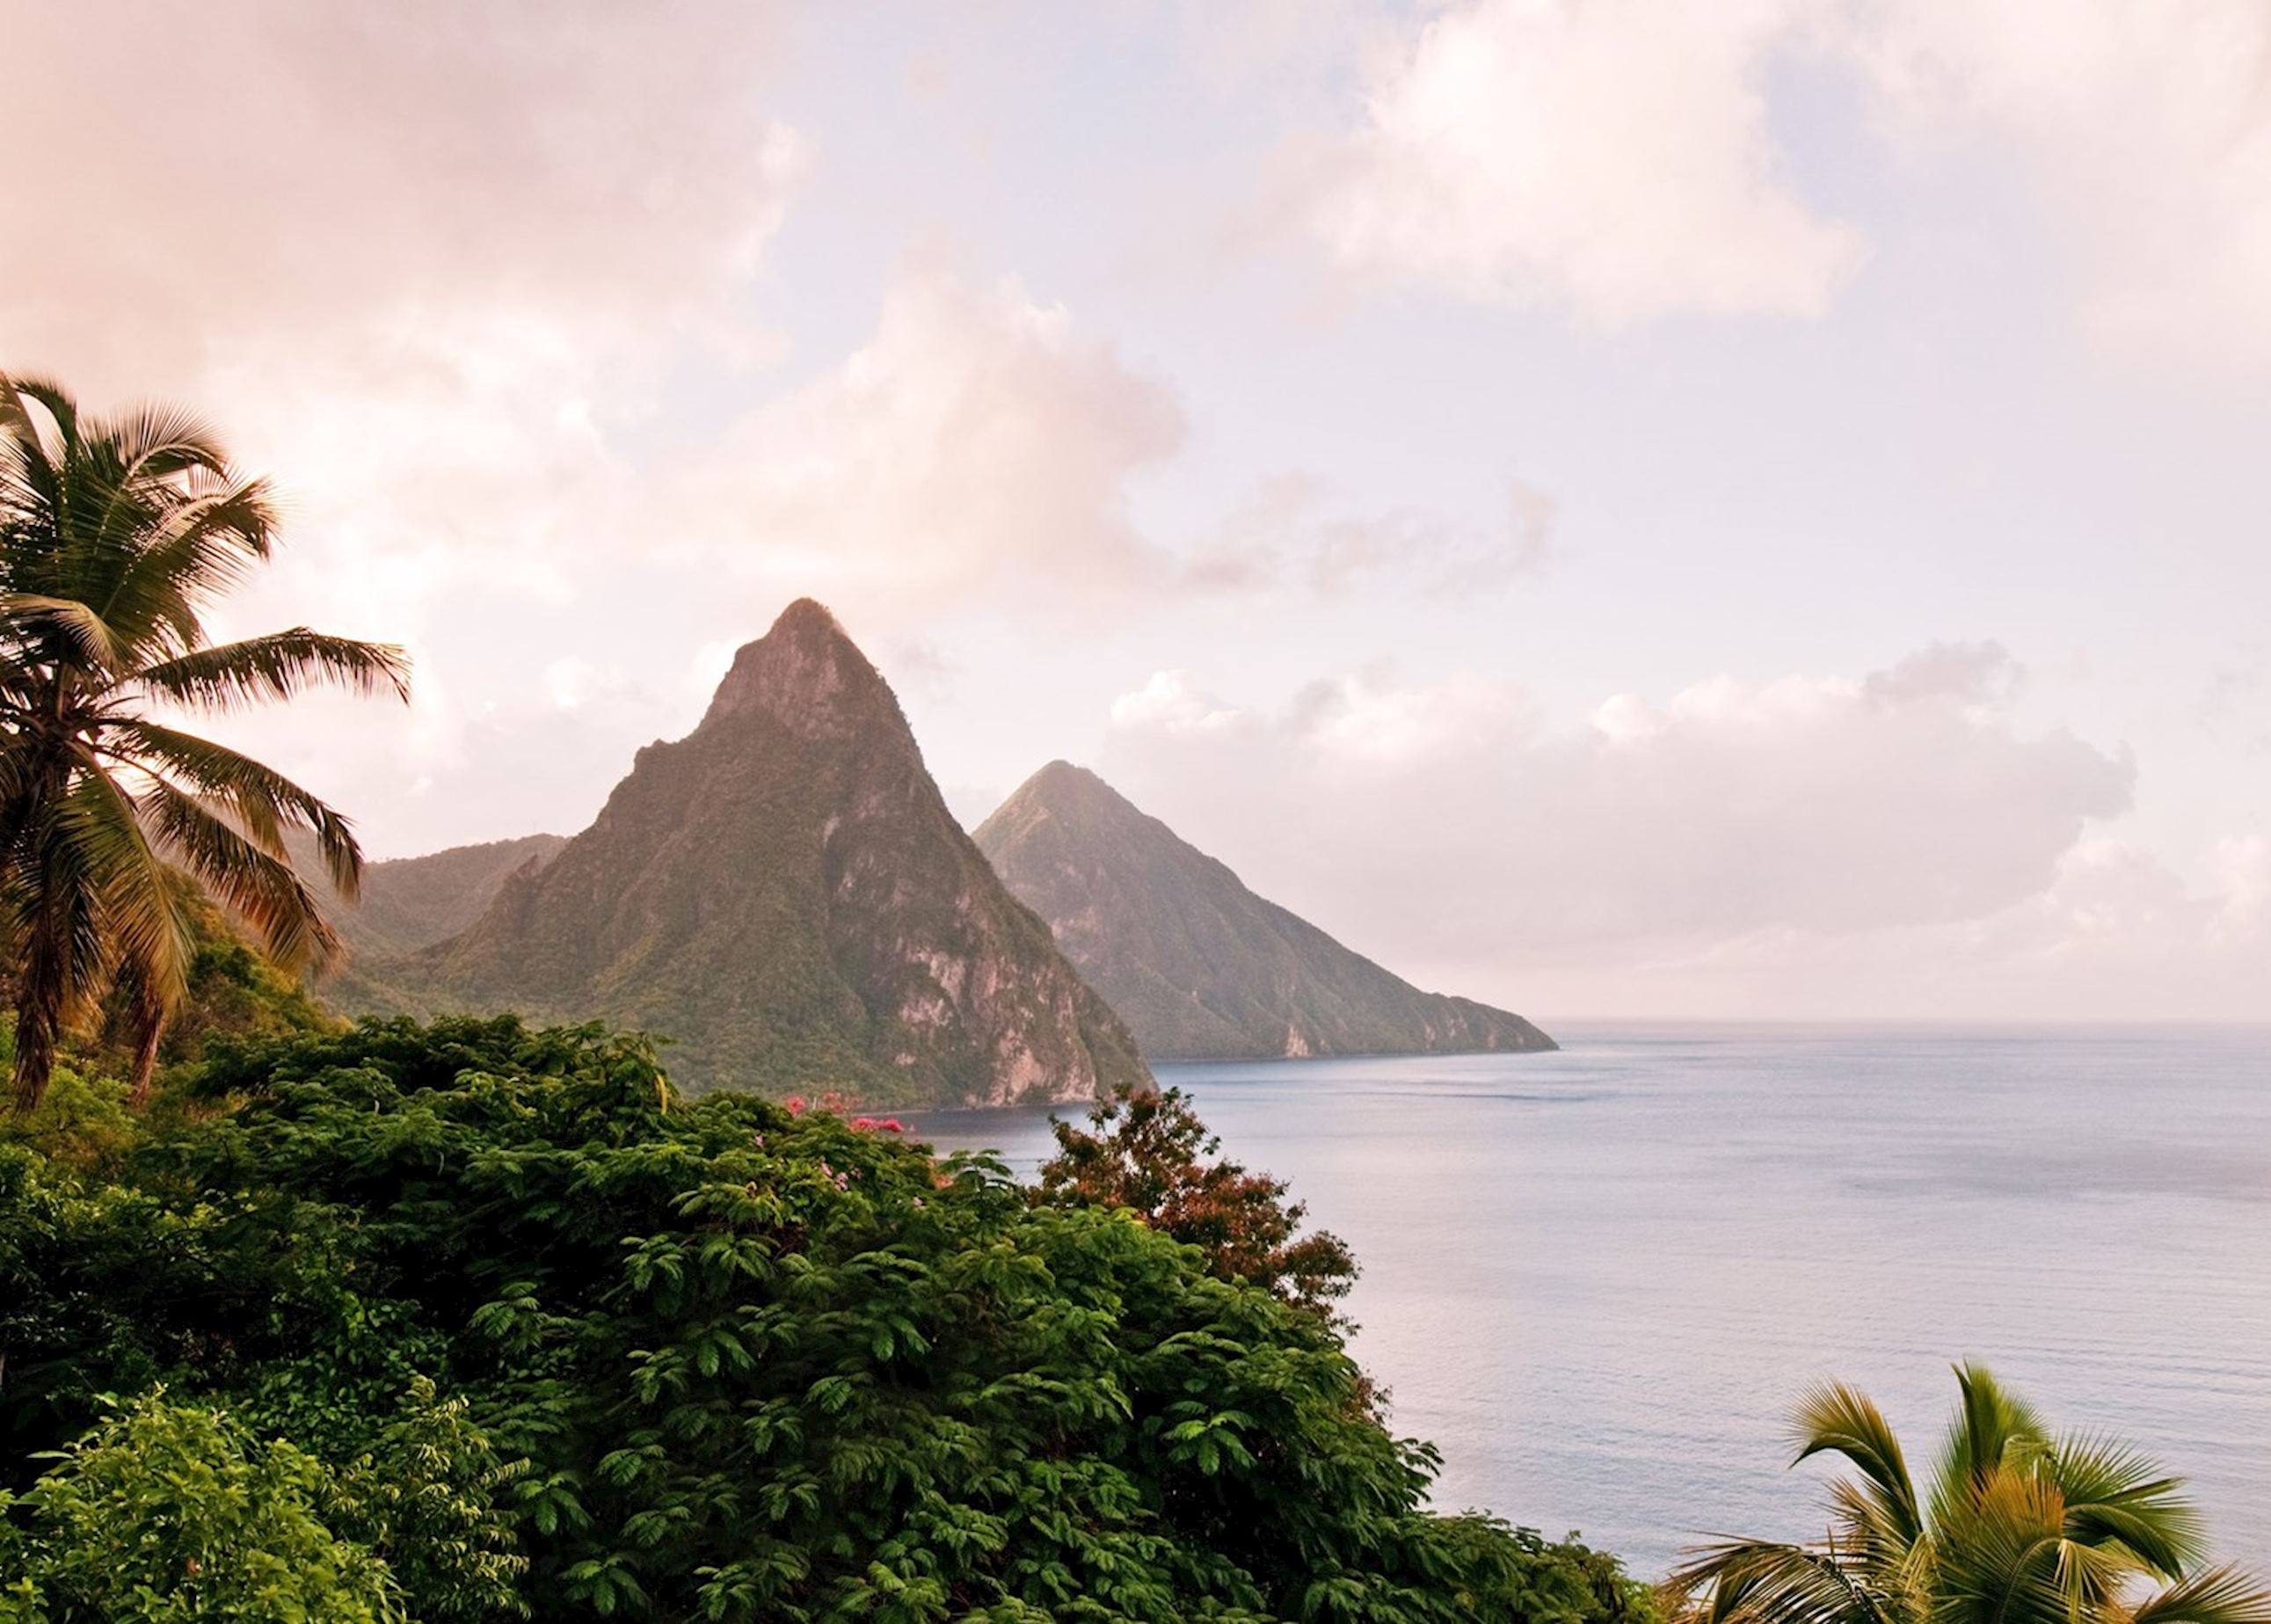 Saint Lucia's Twin Pitons images